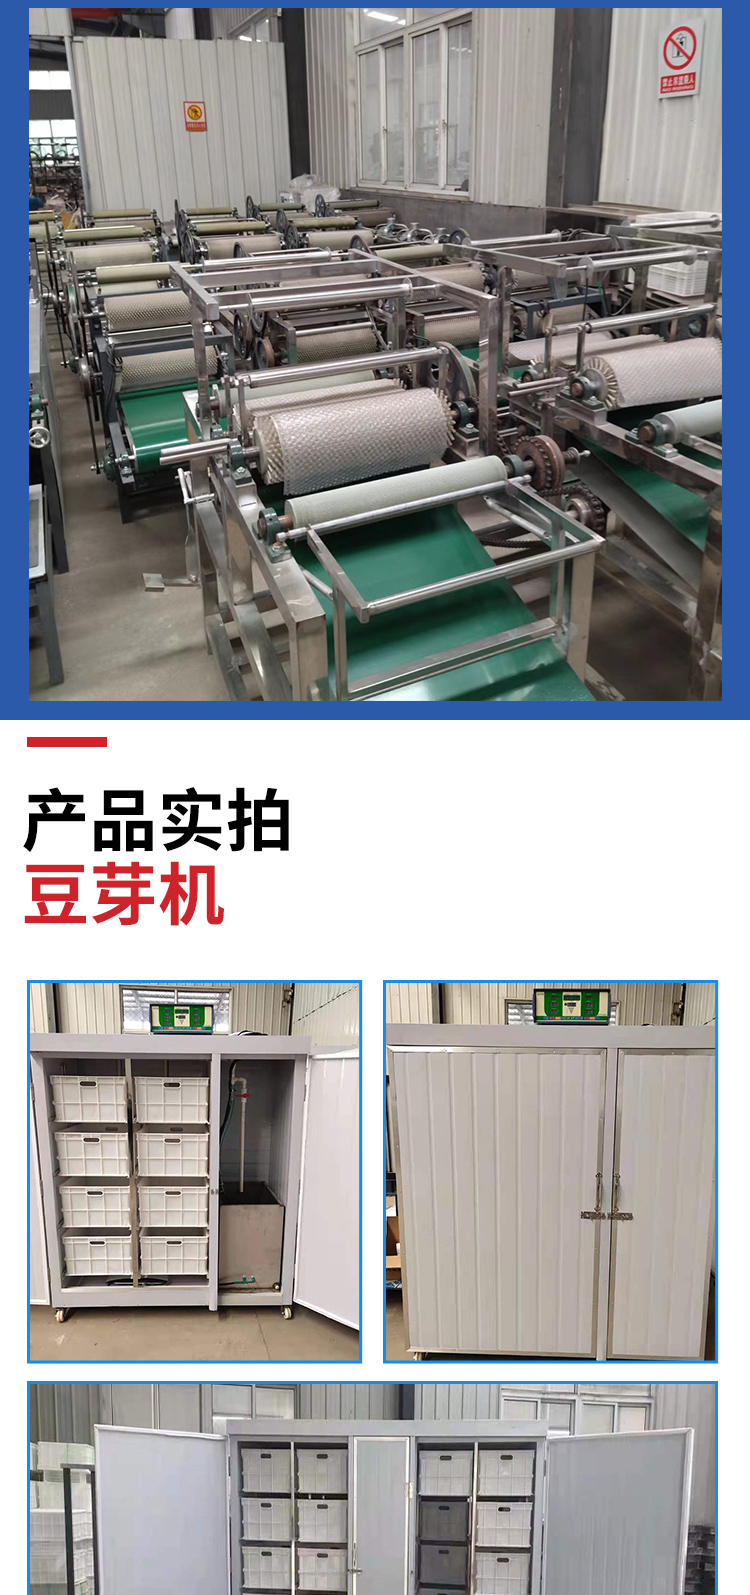 Large intelligent bean sprout machine, multifunctional commercial mung bean sprout production equipment, fully automatic bean product machinery